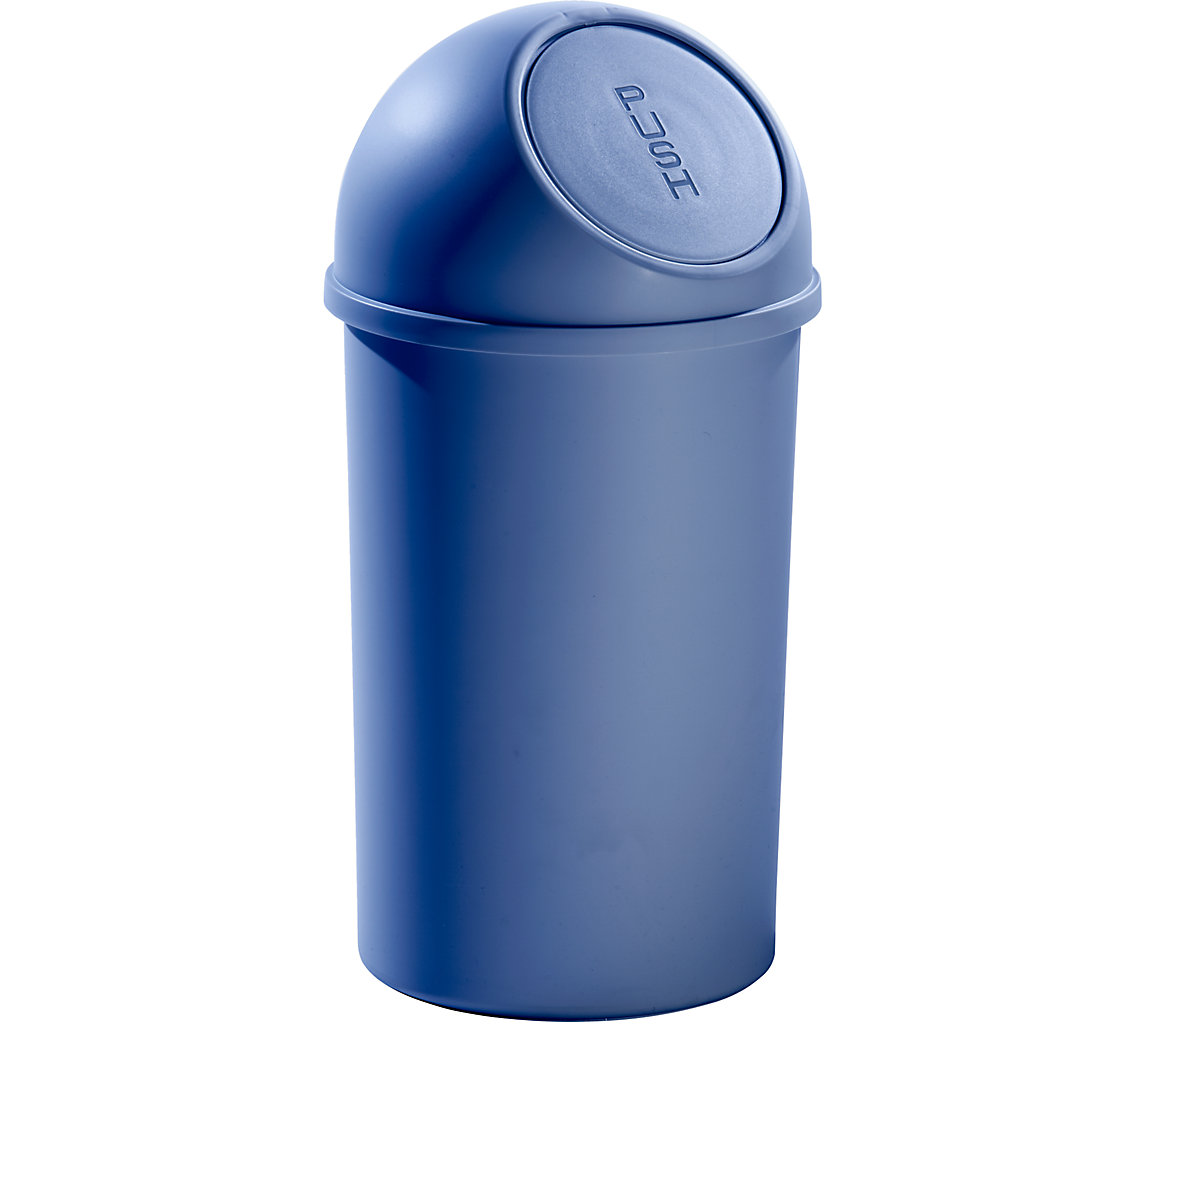 Push top waste bin made of plastic – helit, capacity 25 l, pack of 3, HxØ 615 x 315 mm, blue-5